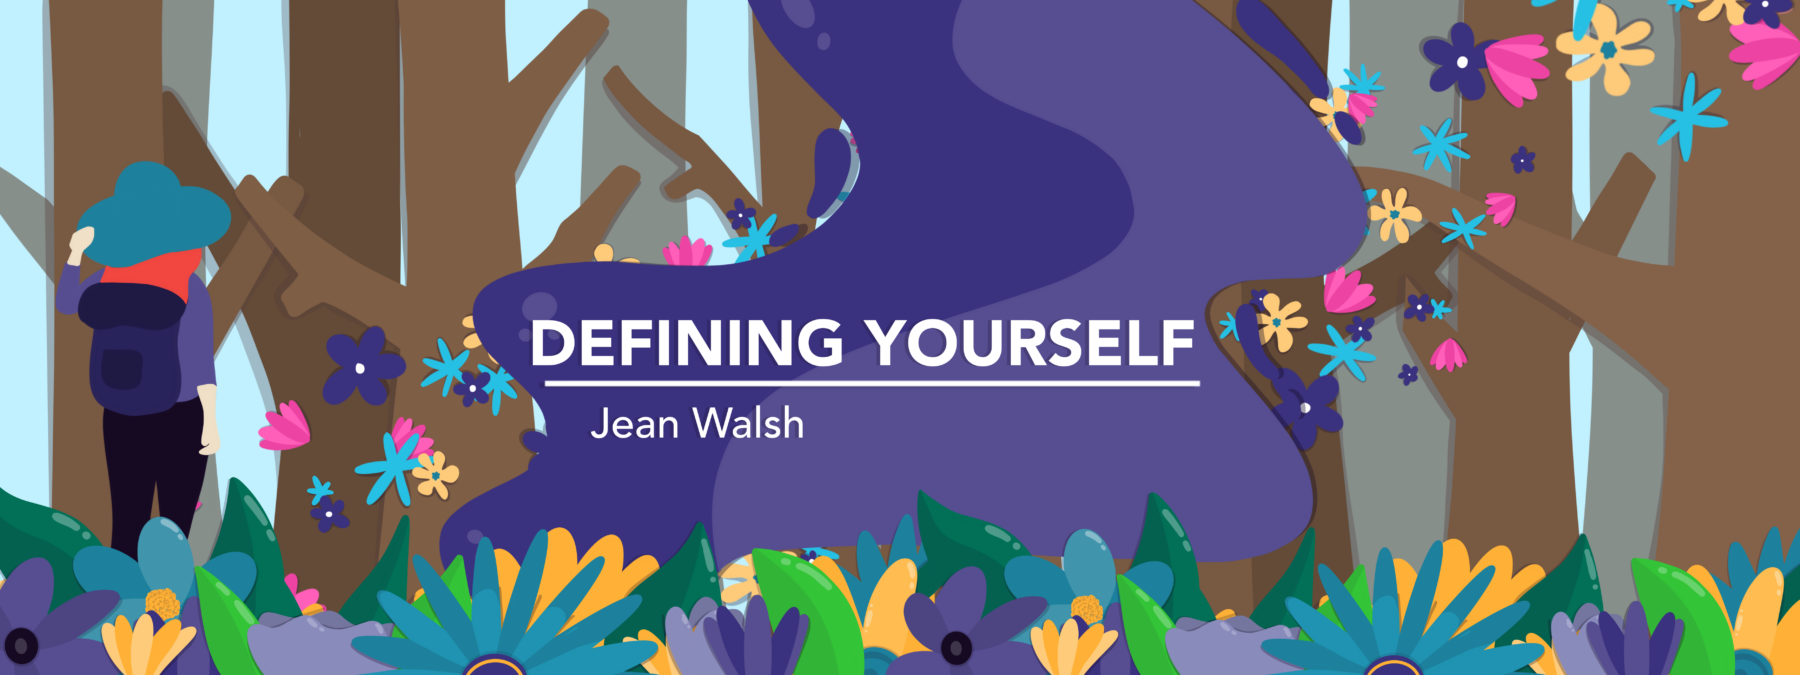 Main banner for "Defining Yourself," a column by Jean Walsh.